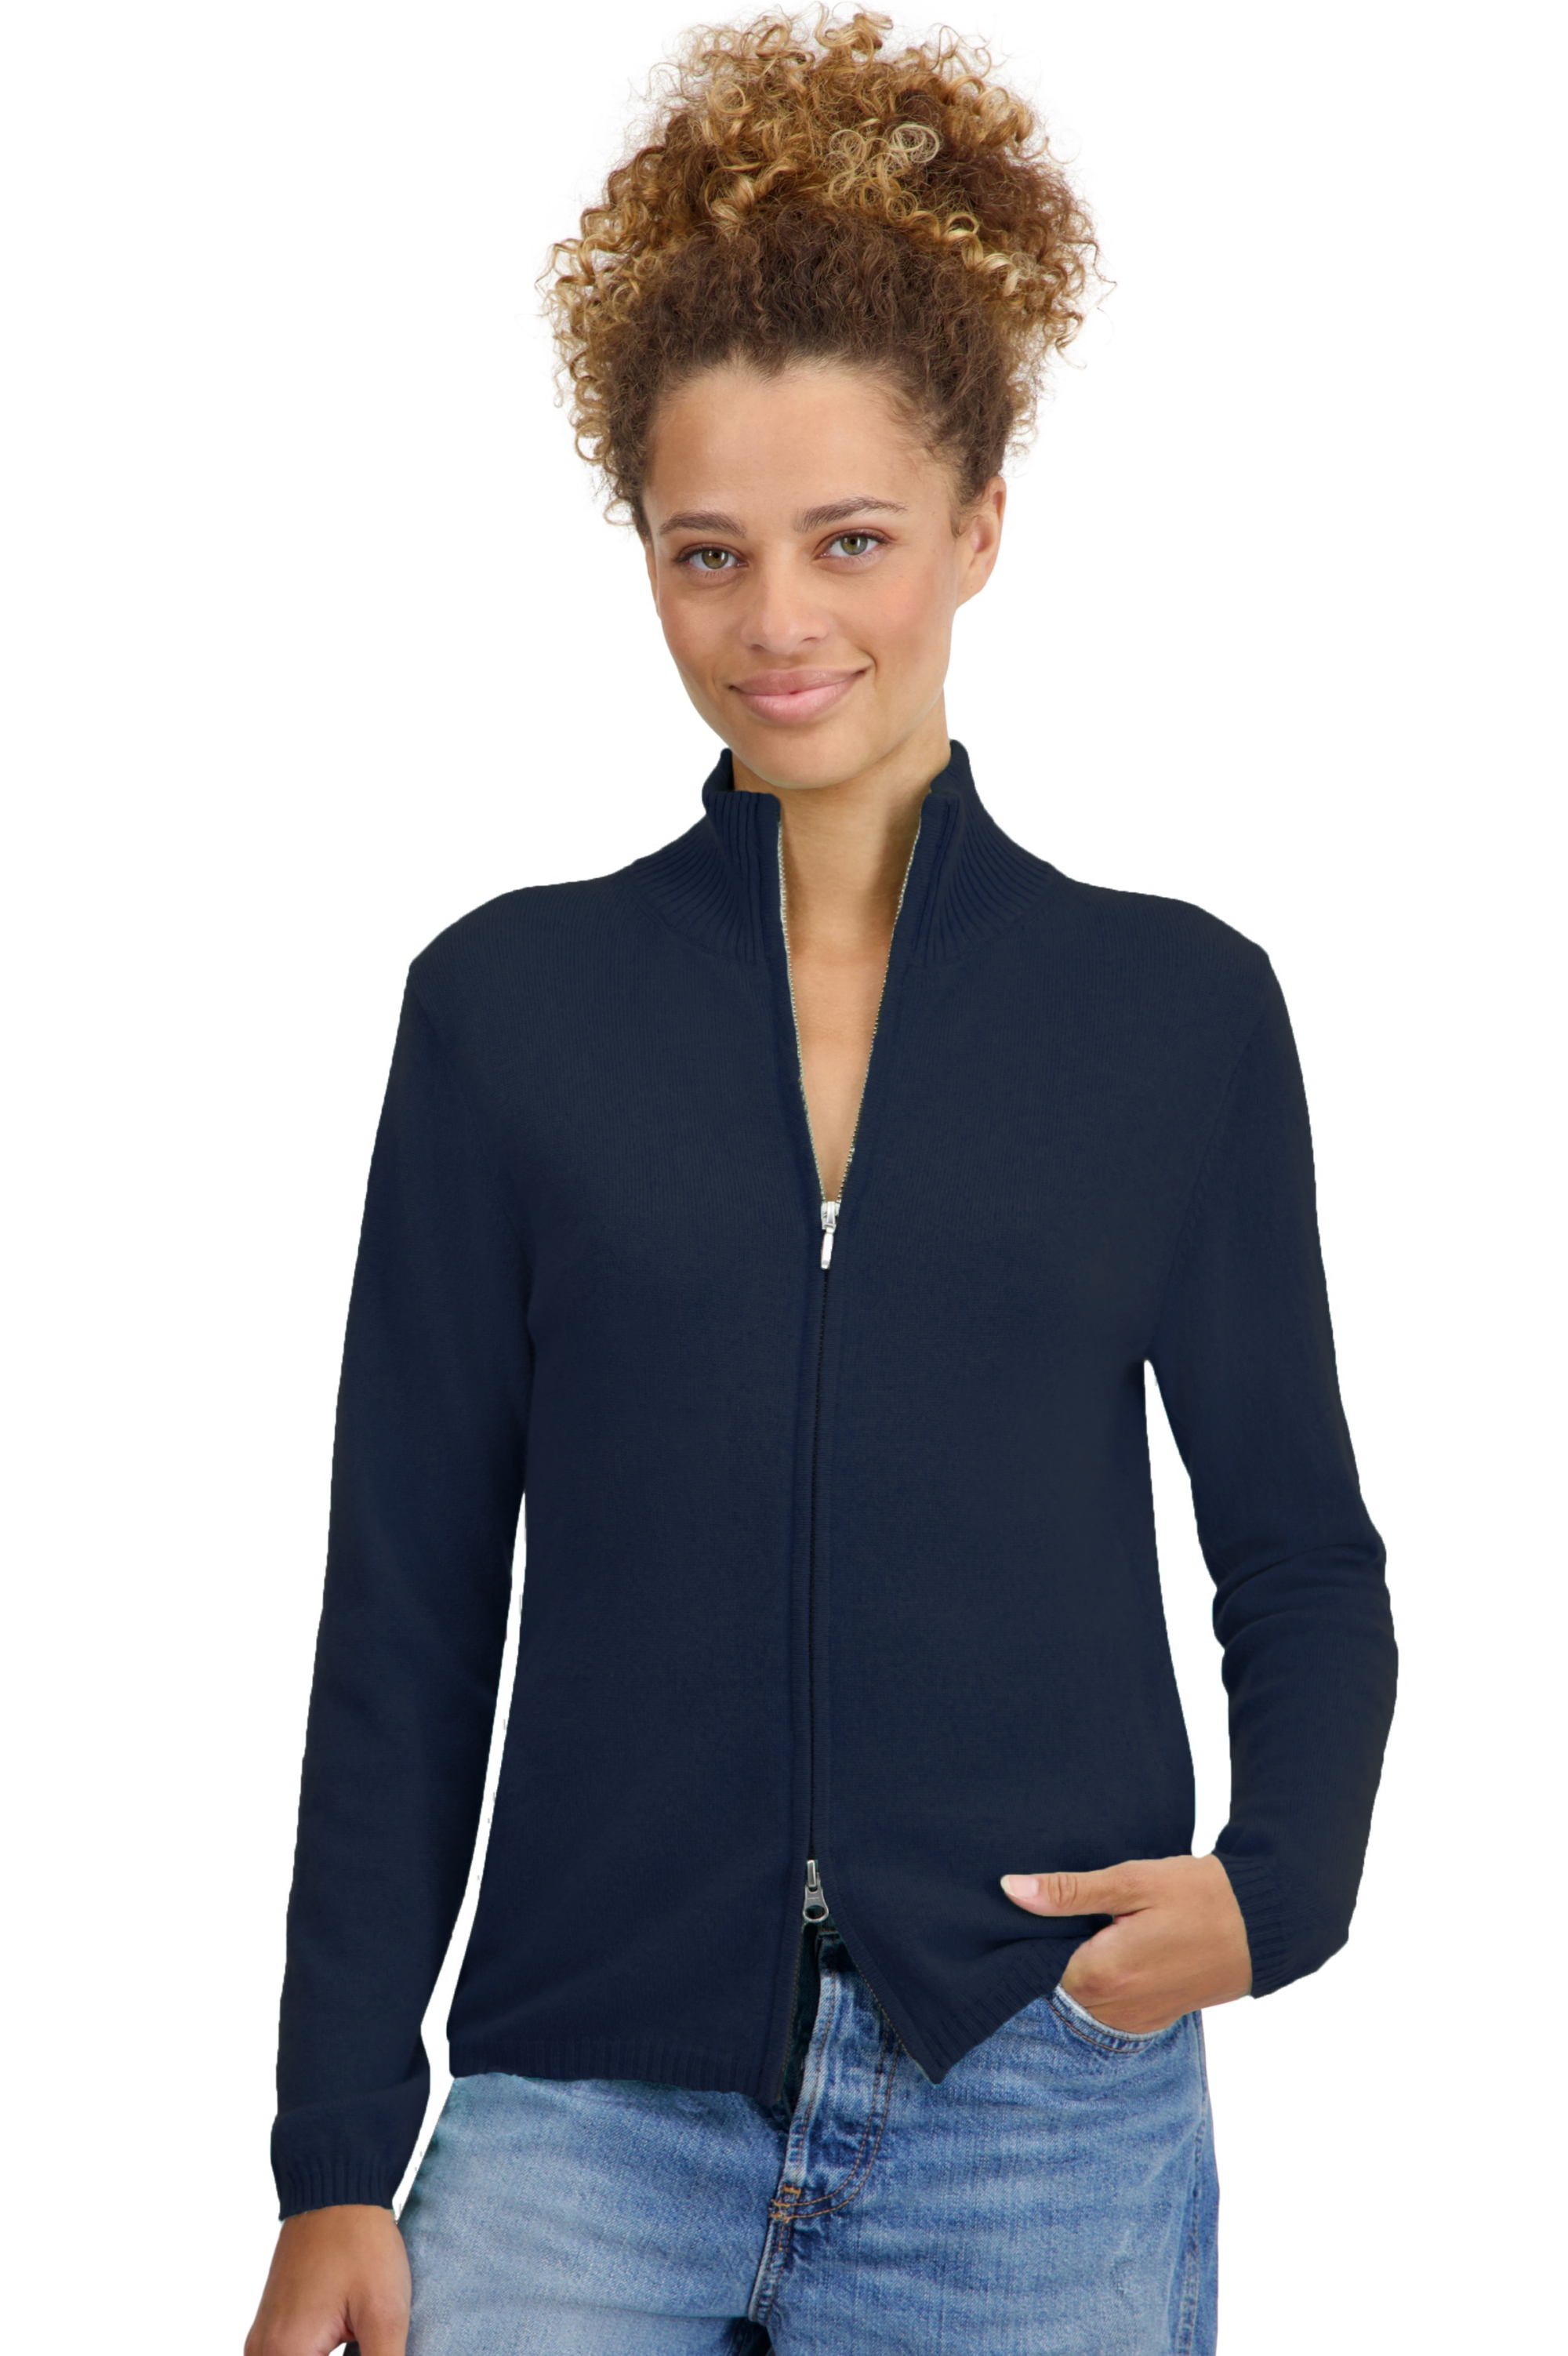 Cashmere ladies basic sweaters at low prices thames first dress blue l